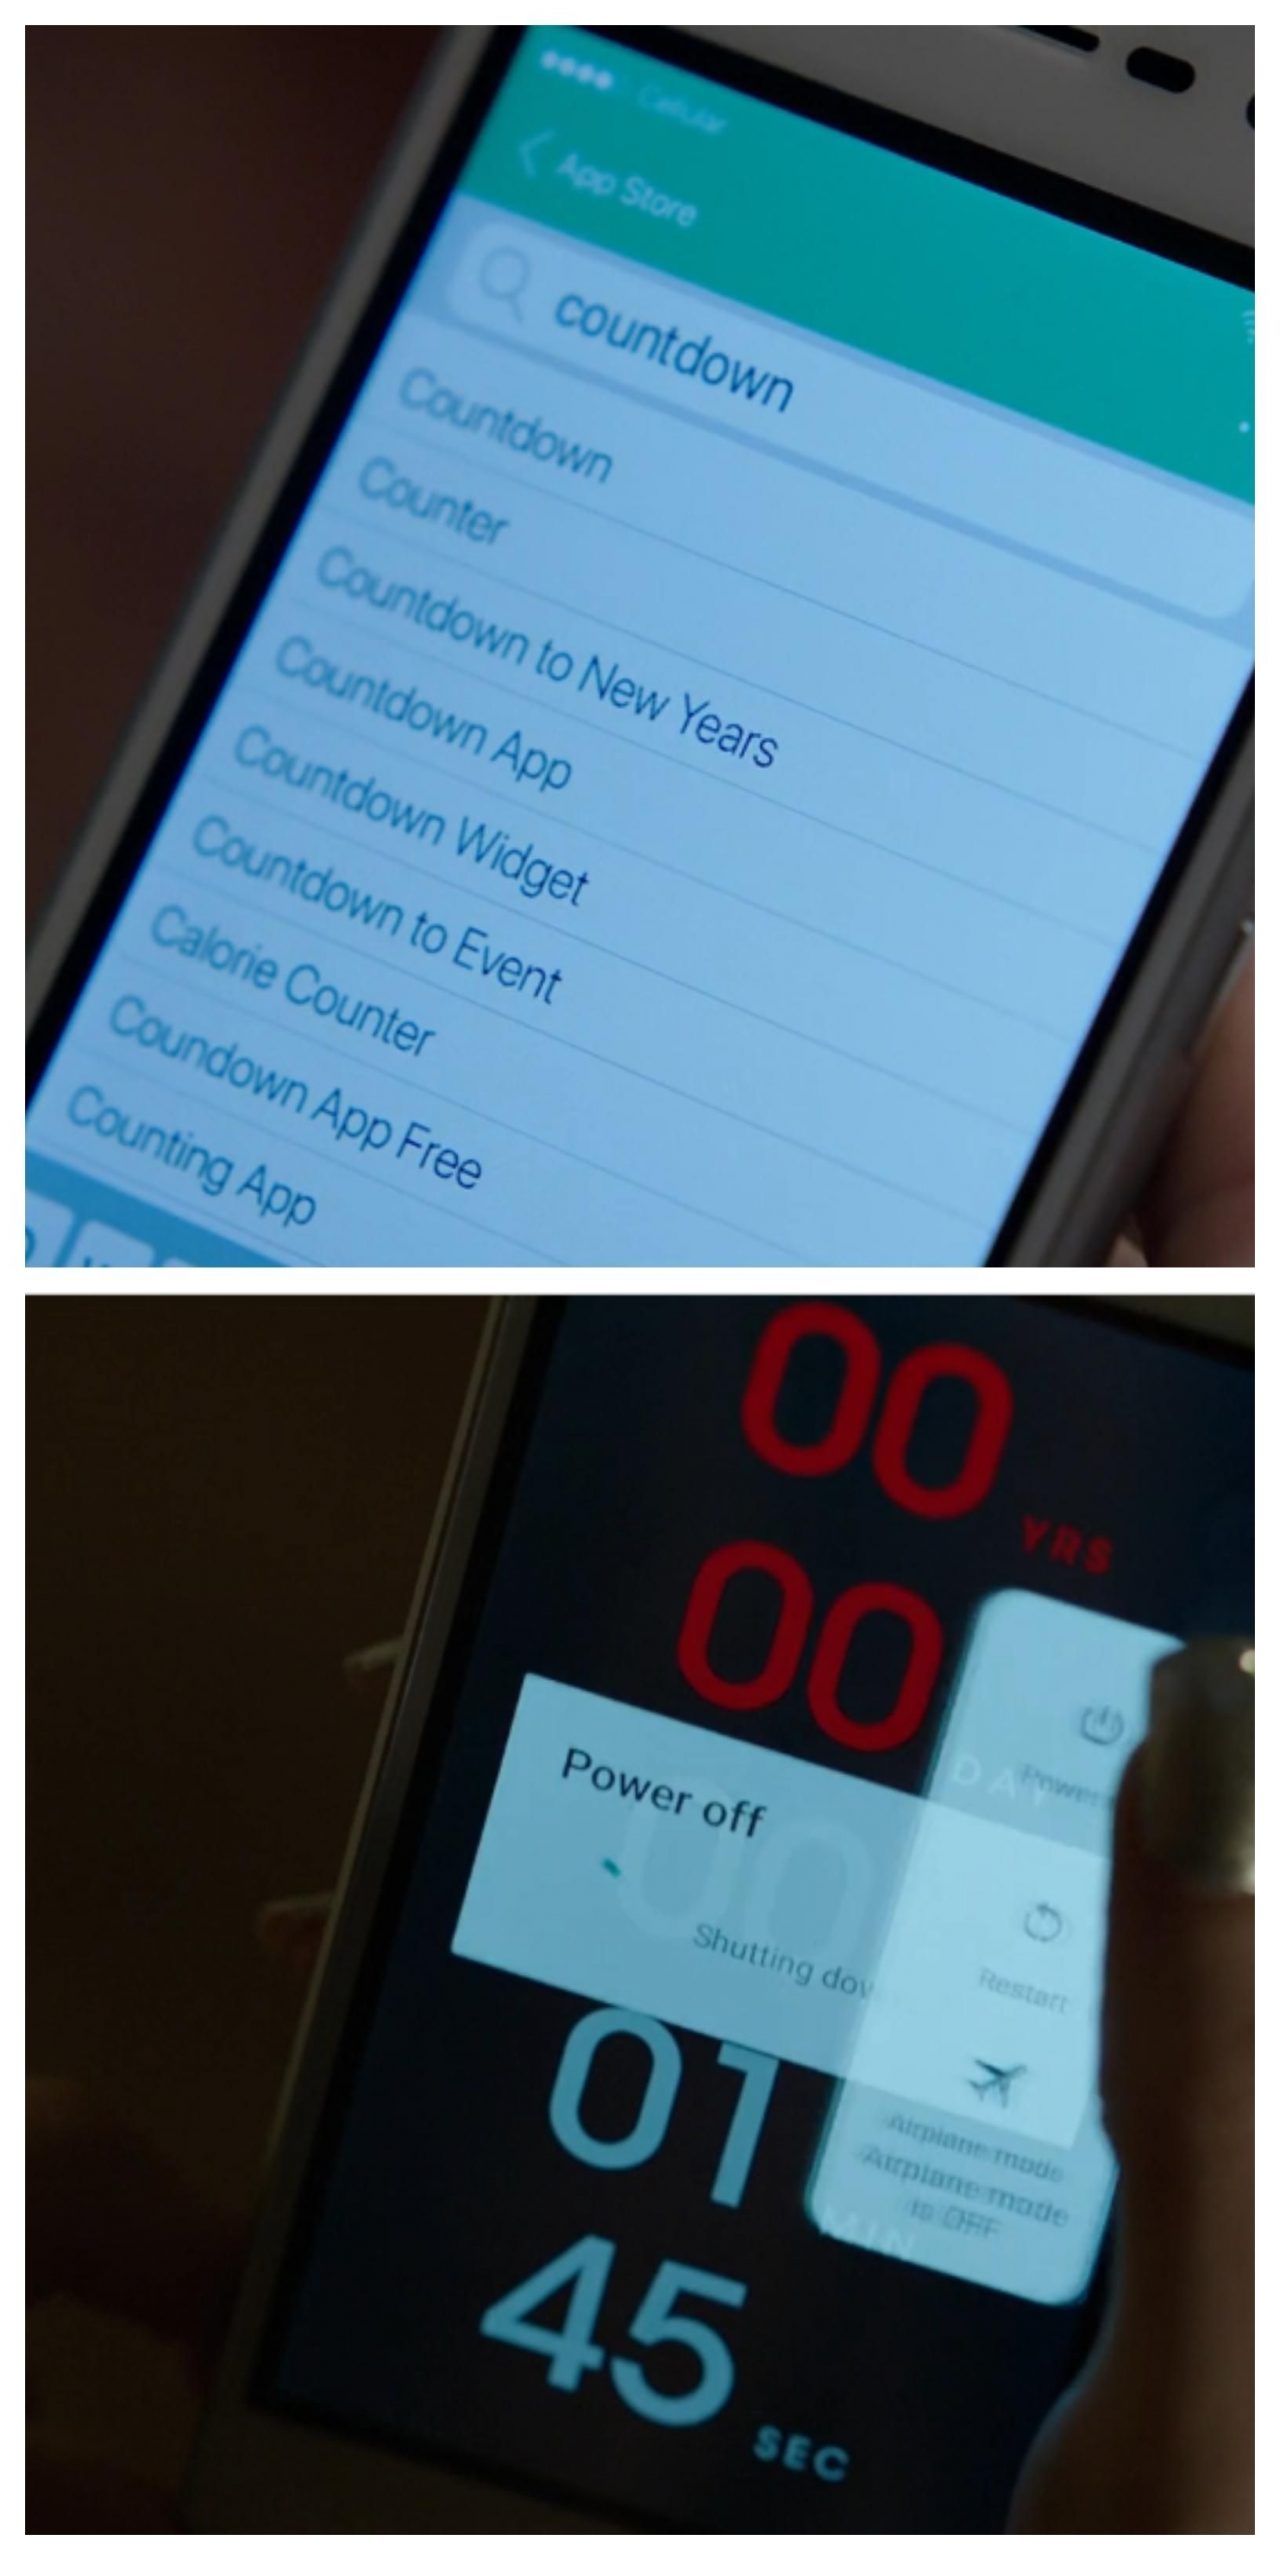 In Countdown(2019) Iphone Is Used While Downloading But